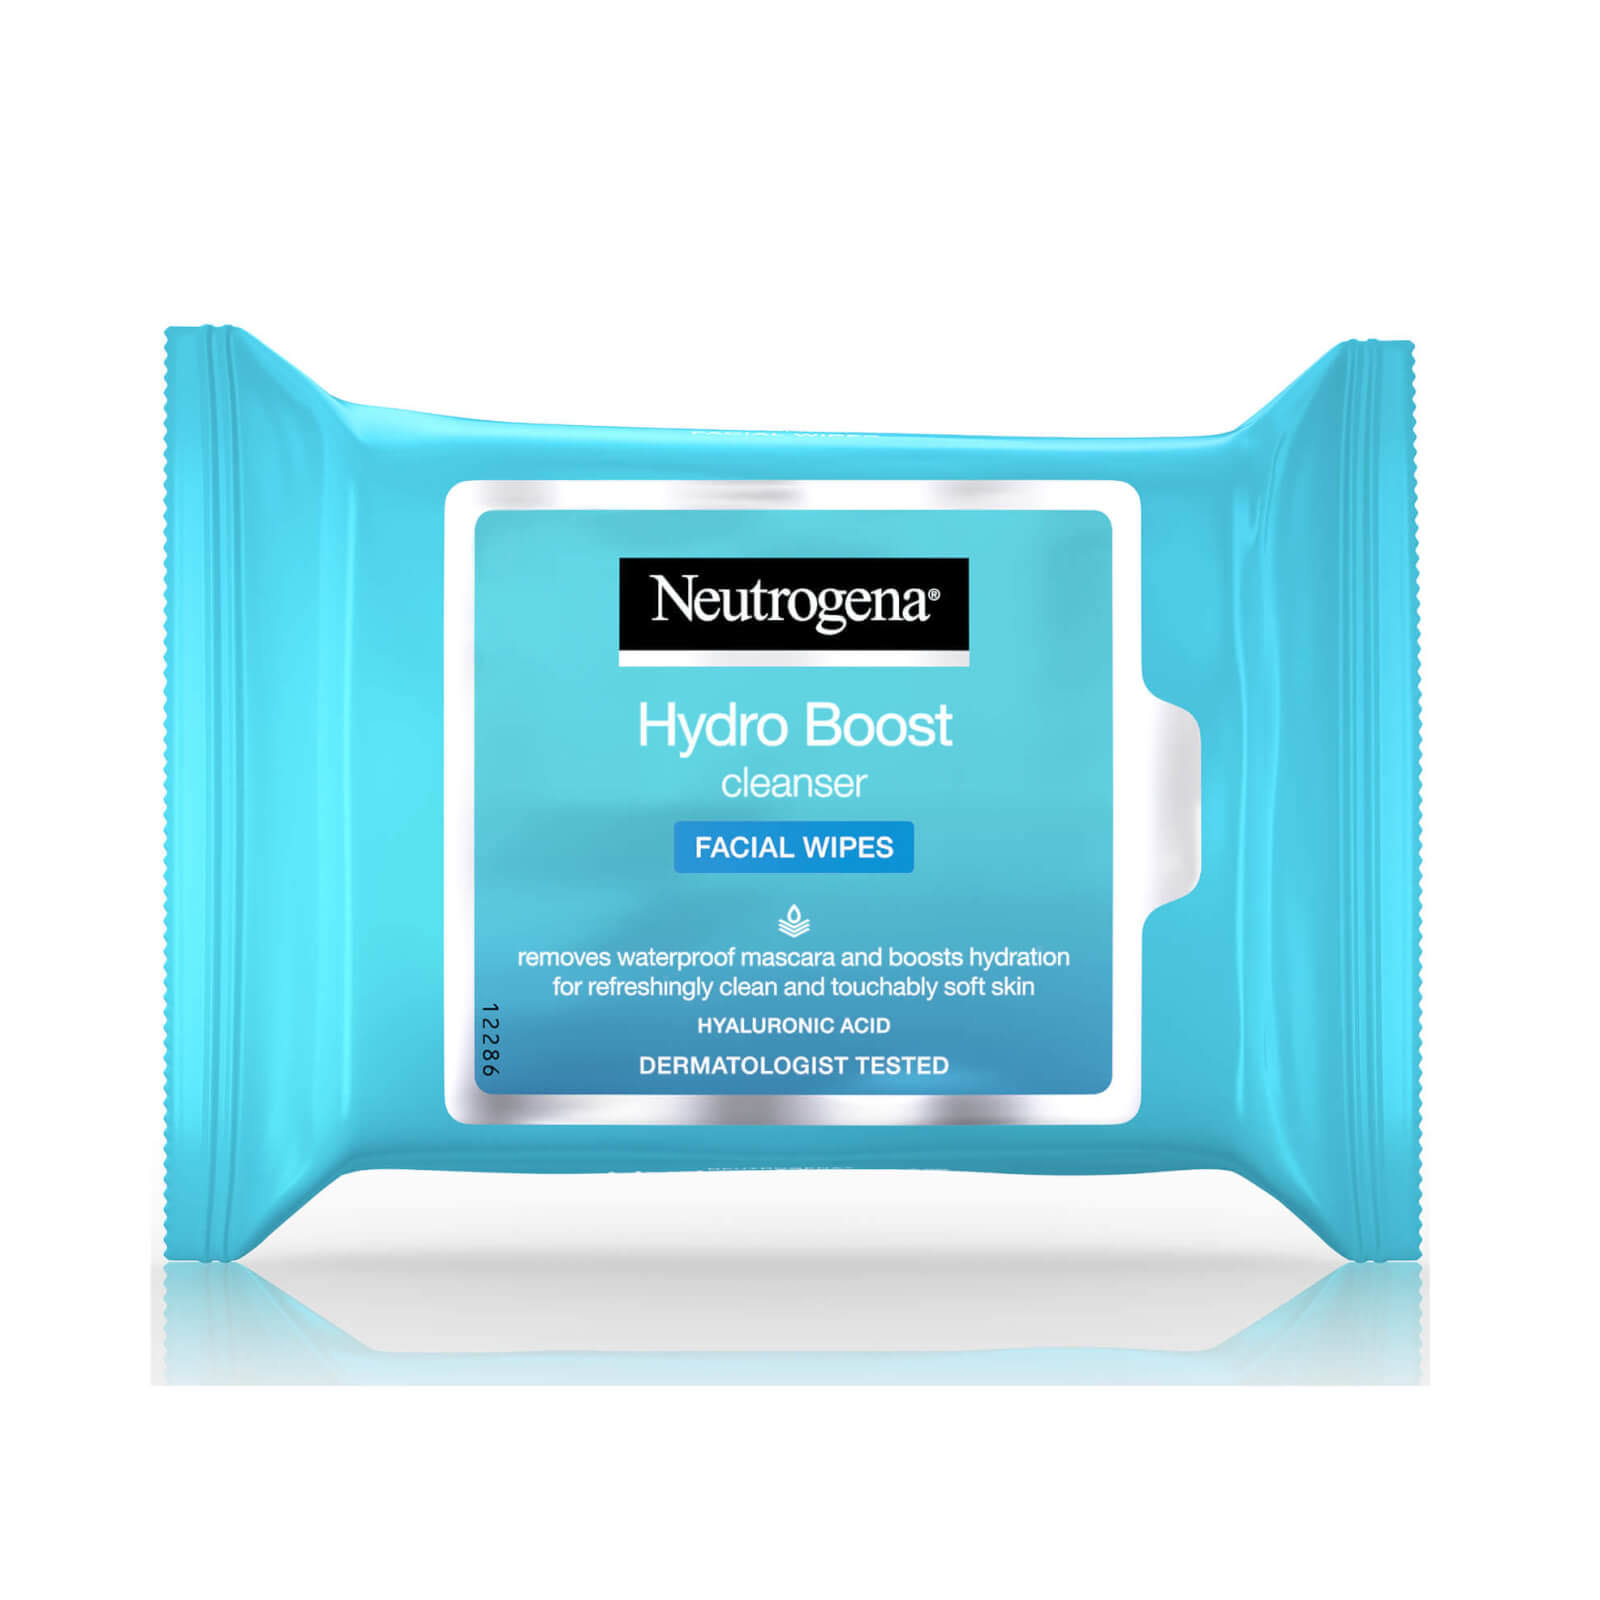 Neutrogena Hydro Boost Cleansing Facial Wipes - 25 Wipes